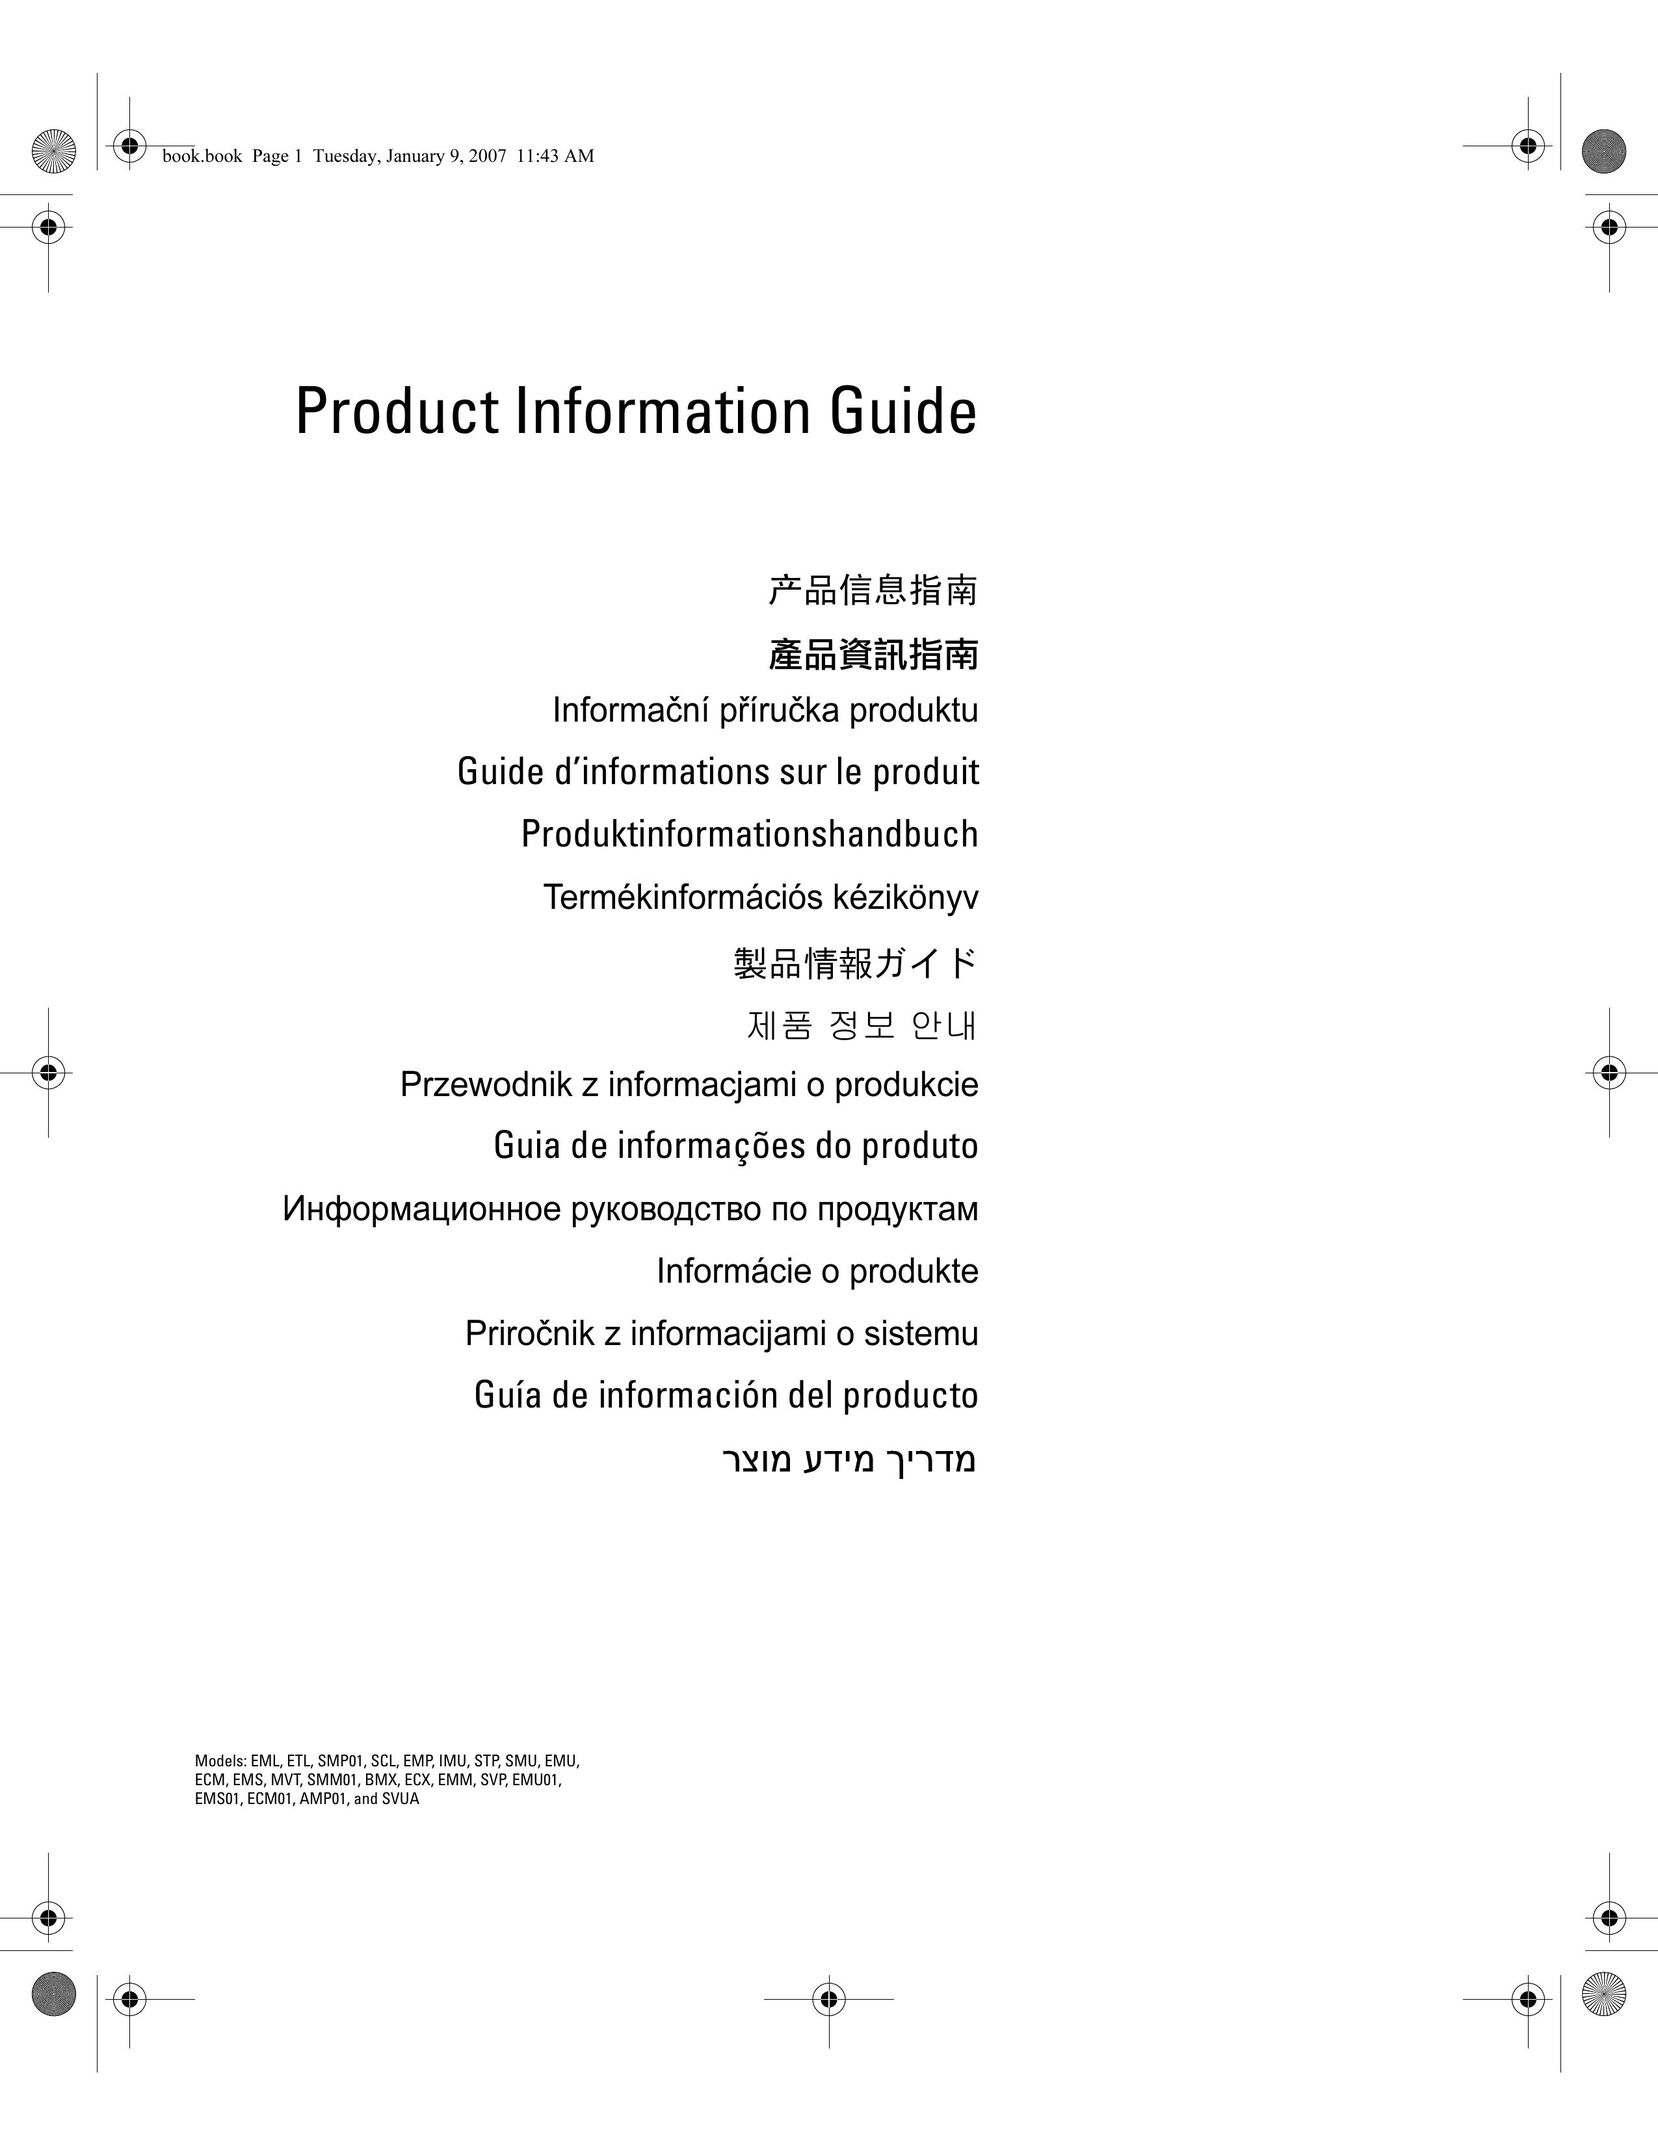 Dell EML Plumbing Product User Manual